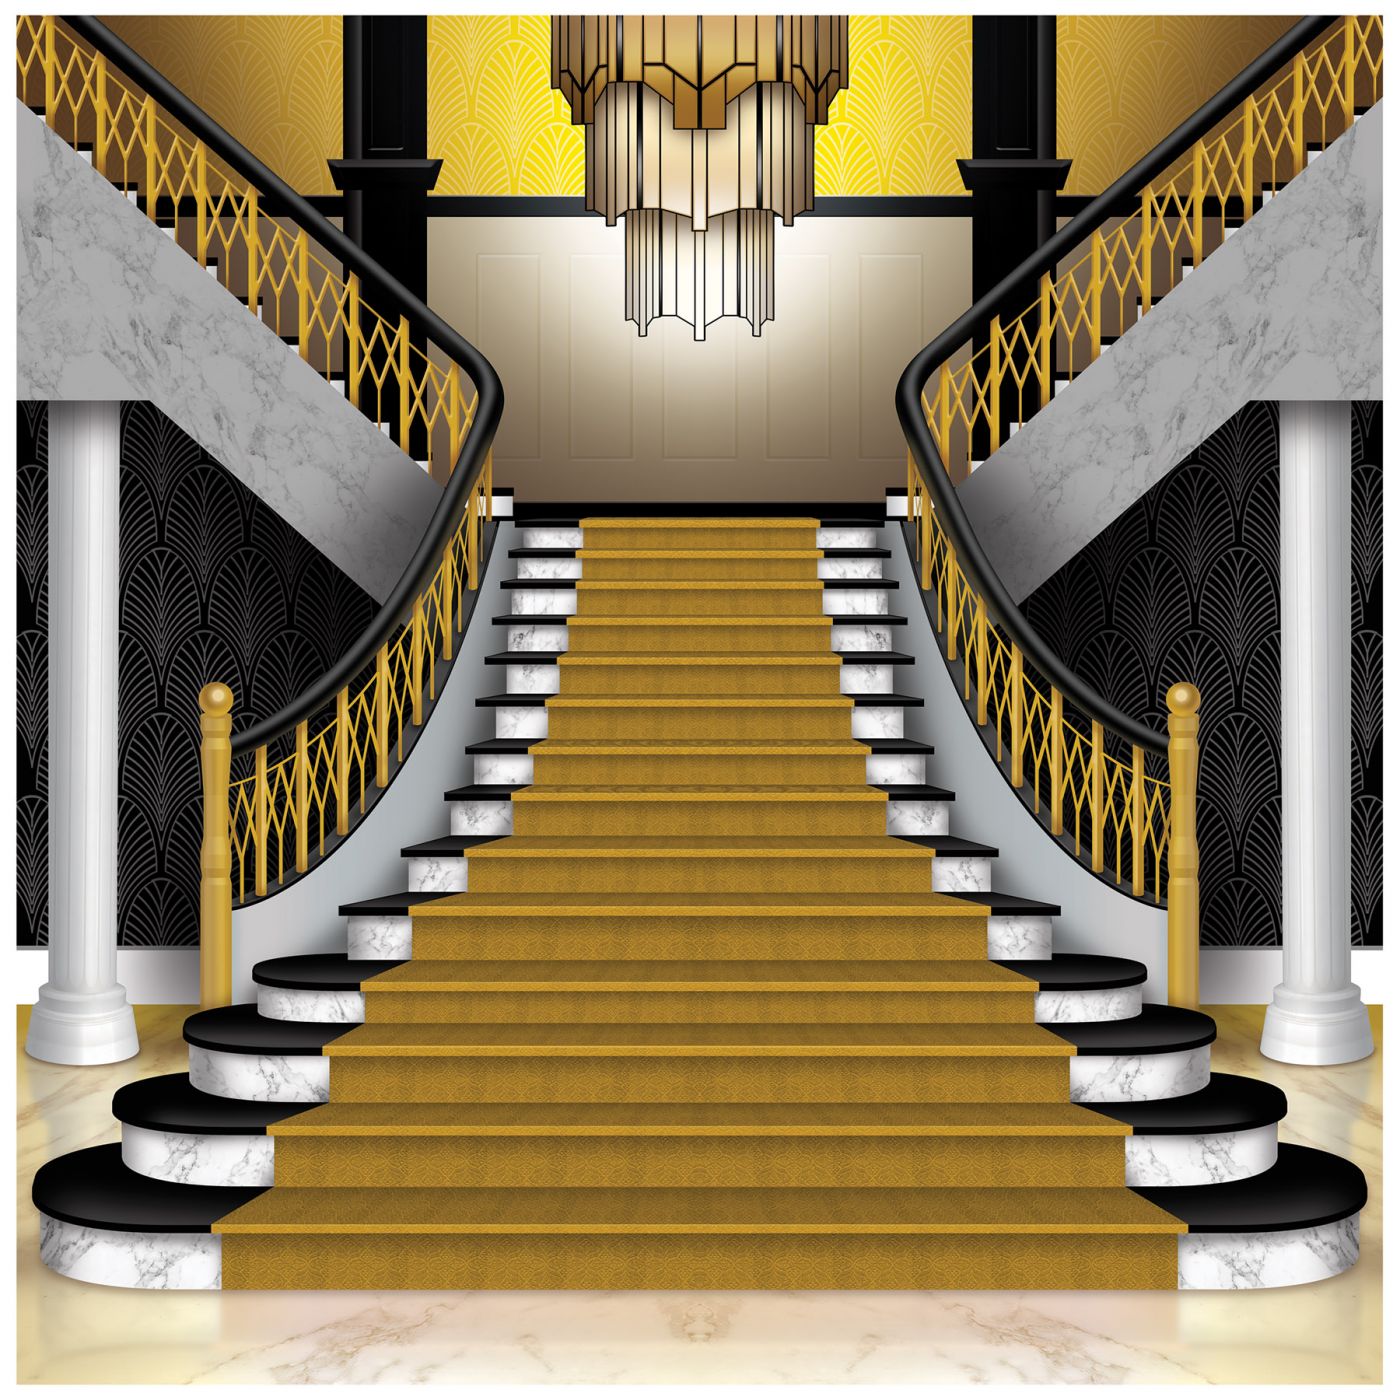 Great 20's Grand Staircase Photo Prop (1) image